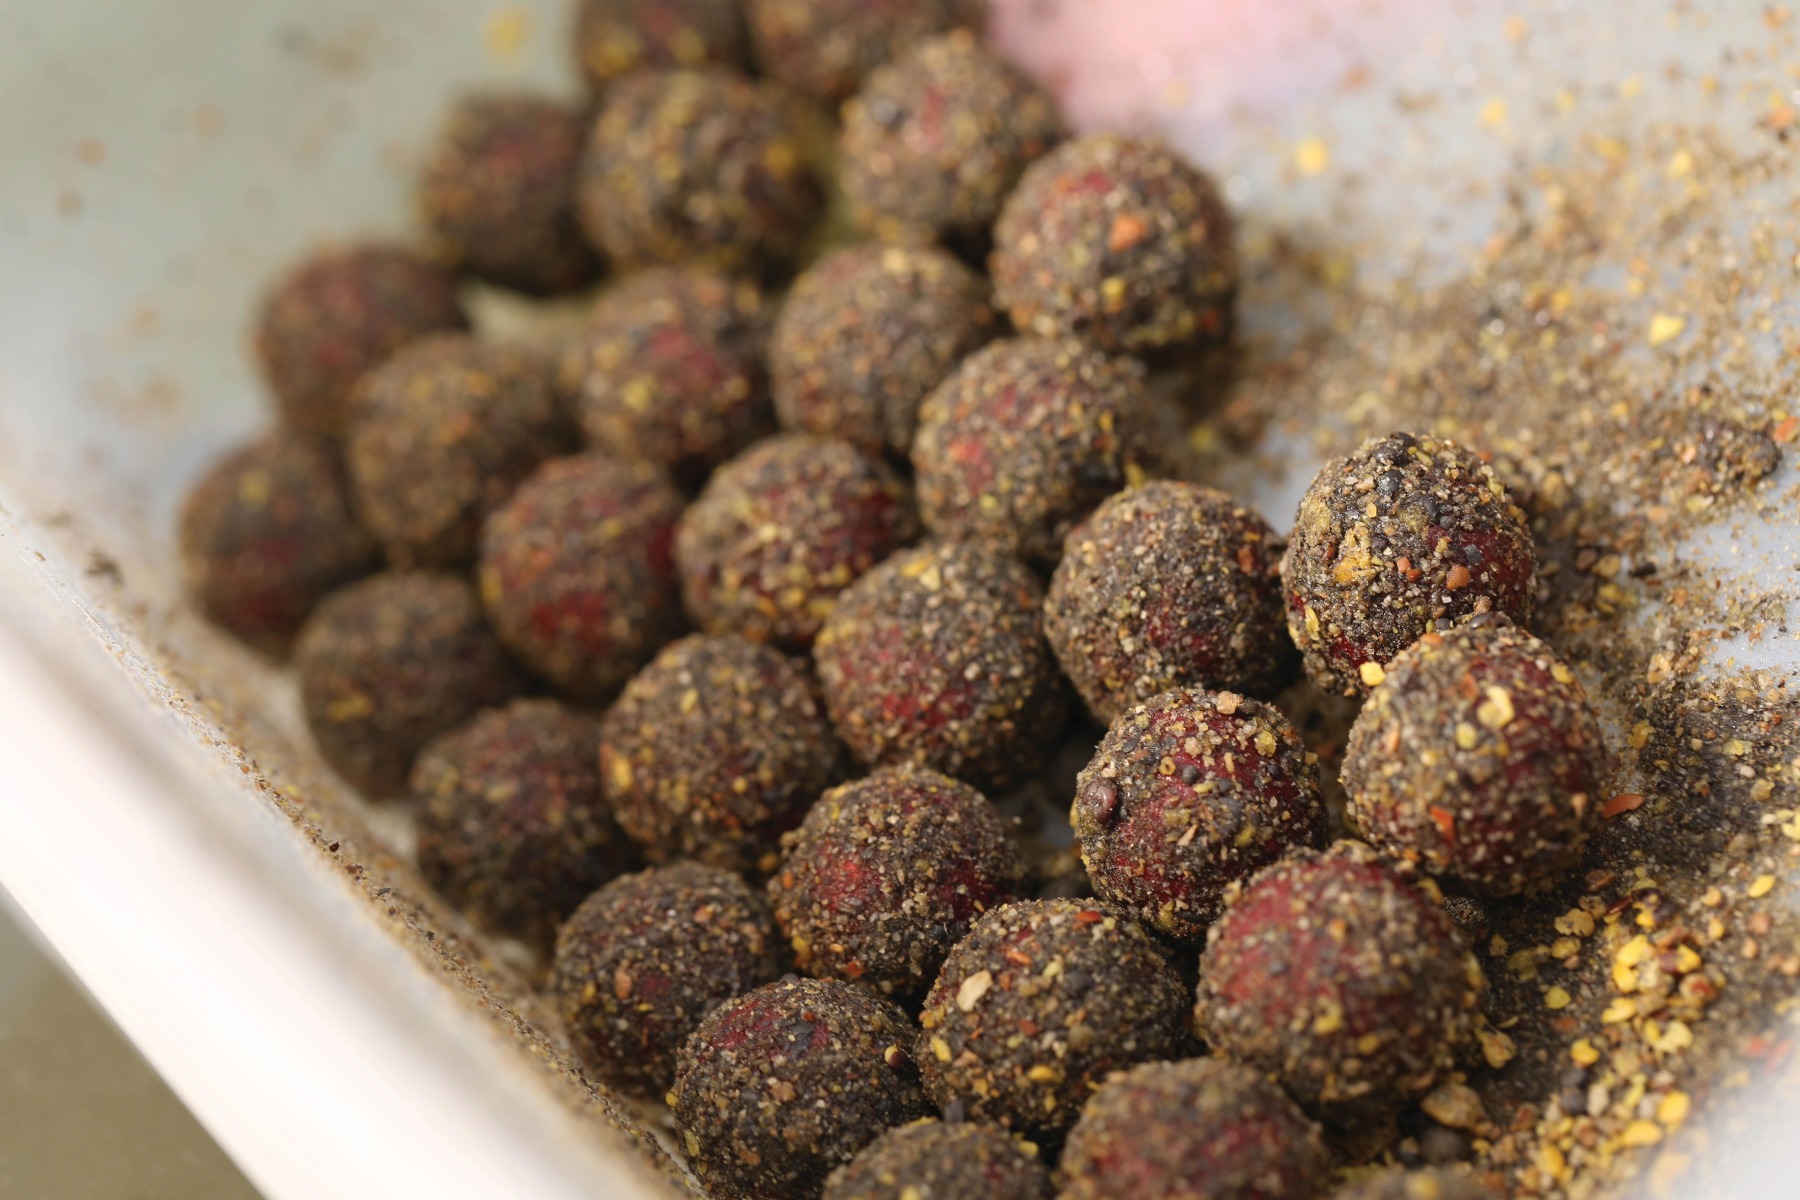 6. Again, roll the hookbaits around in the tub to give them all a groundbait coating. 